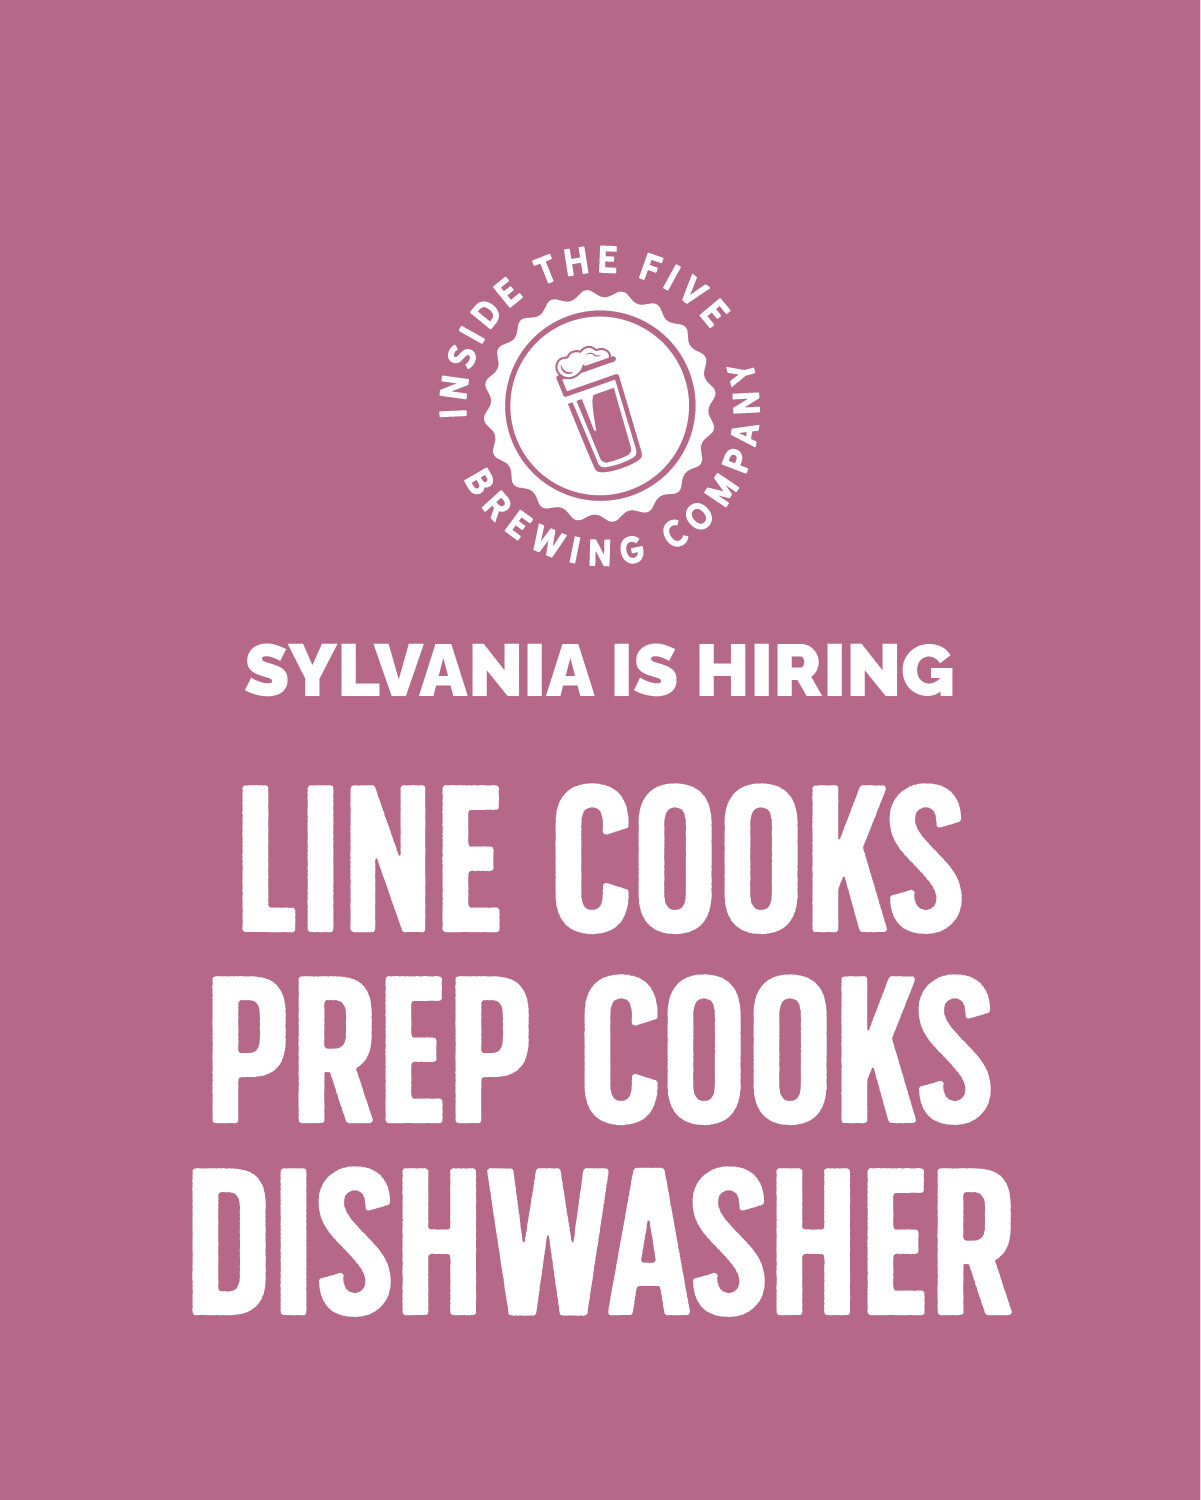 Join our Sylvania kitchen team and apply to be our next line cook, prep cook or dishwasher! Apply now: https://www.insidethefivebrewing.com/contact